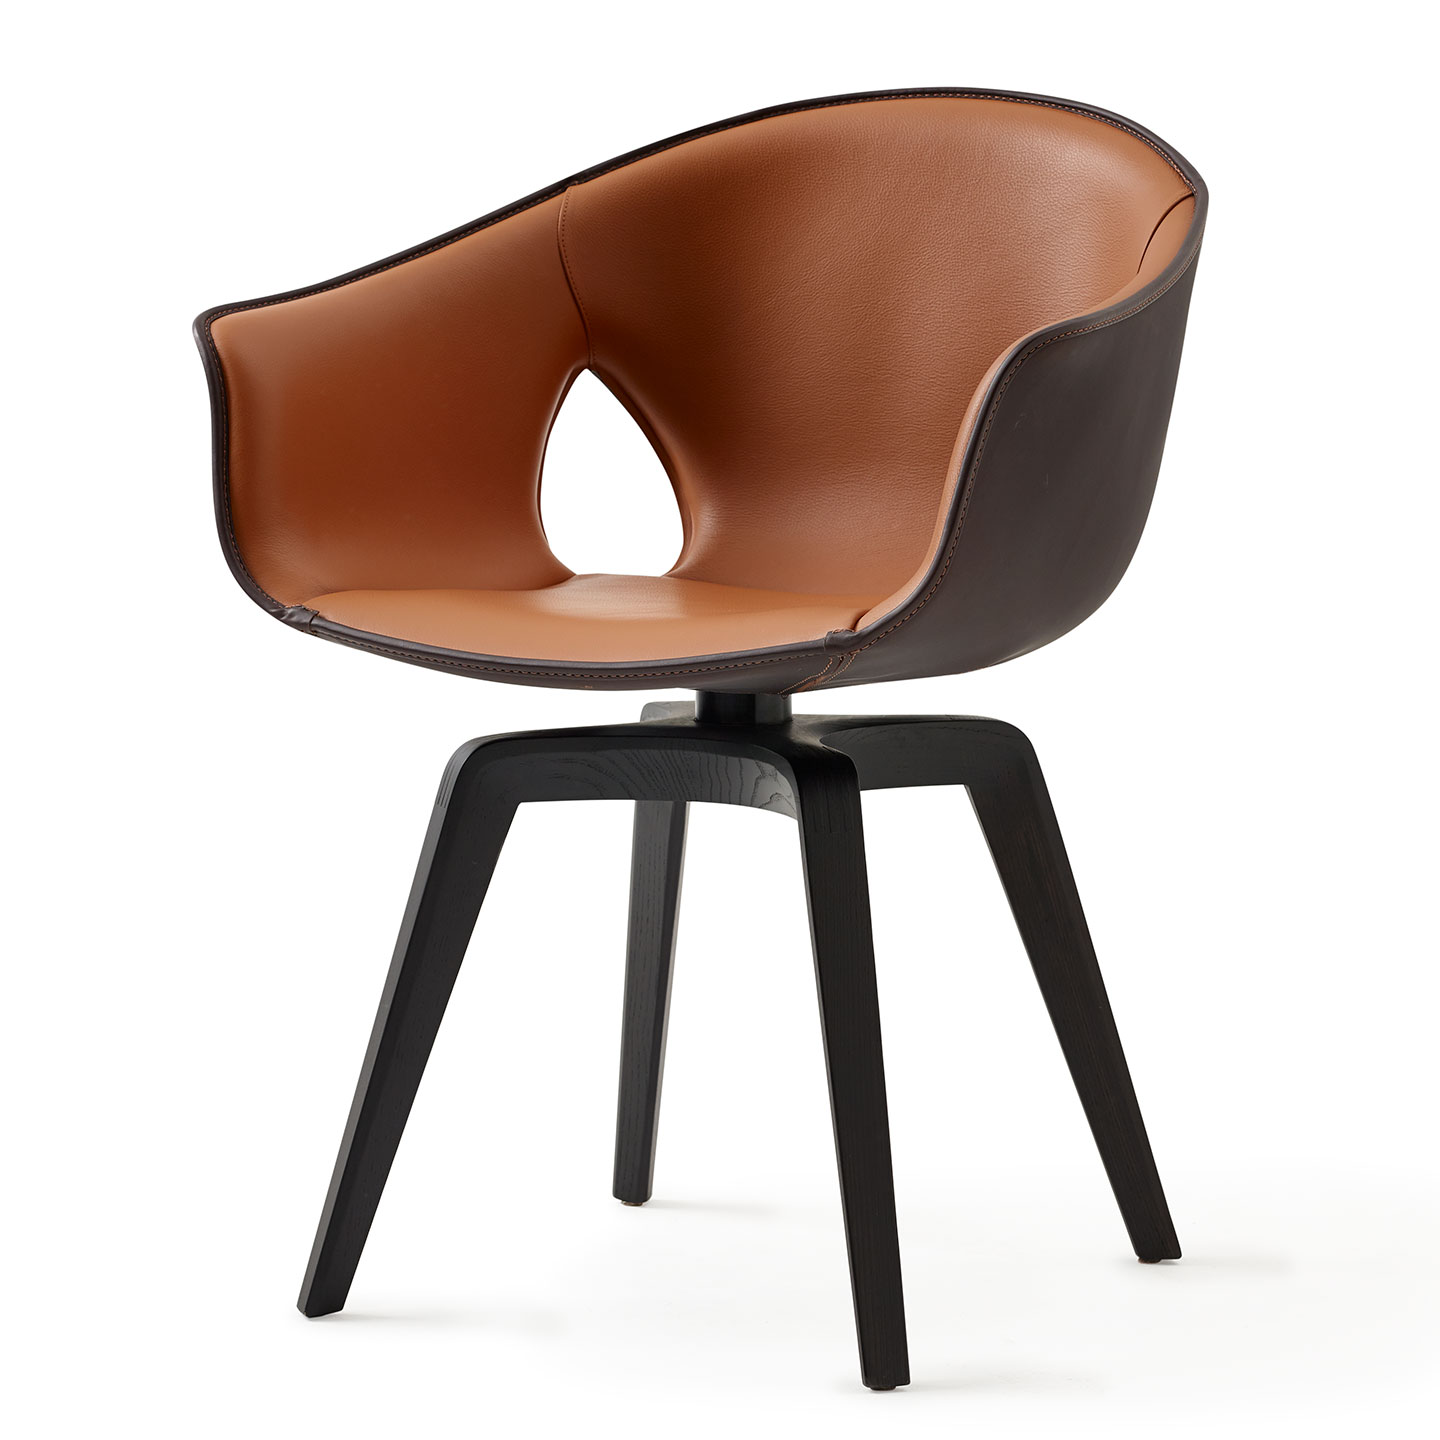 Haworth Ginger chair in orange leather and brown exterior side view